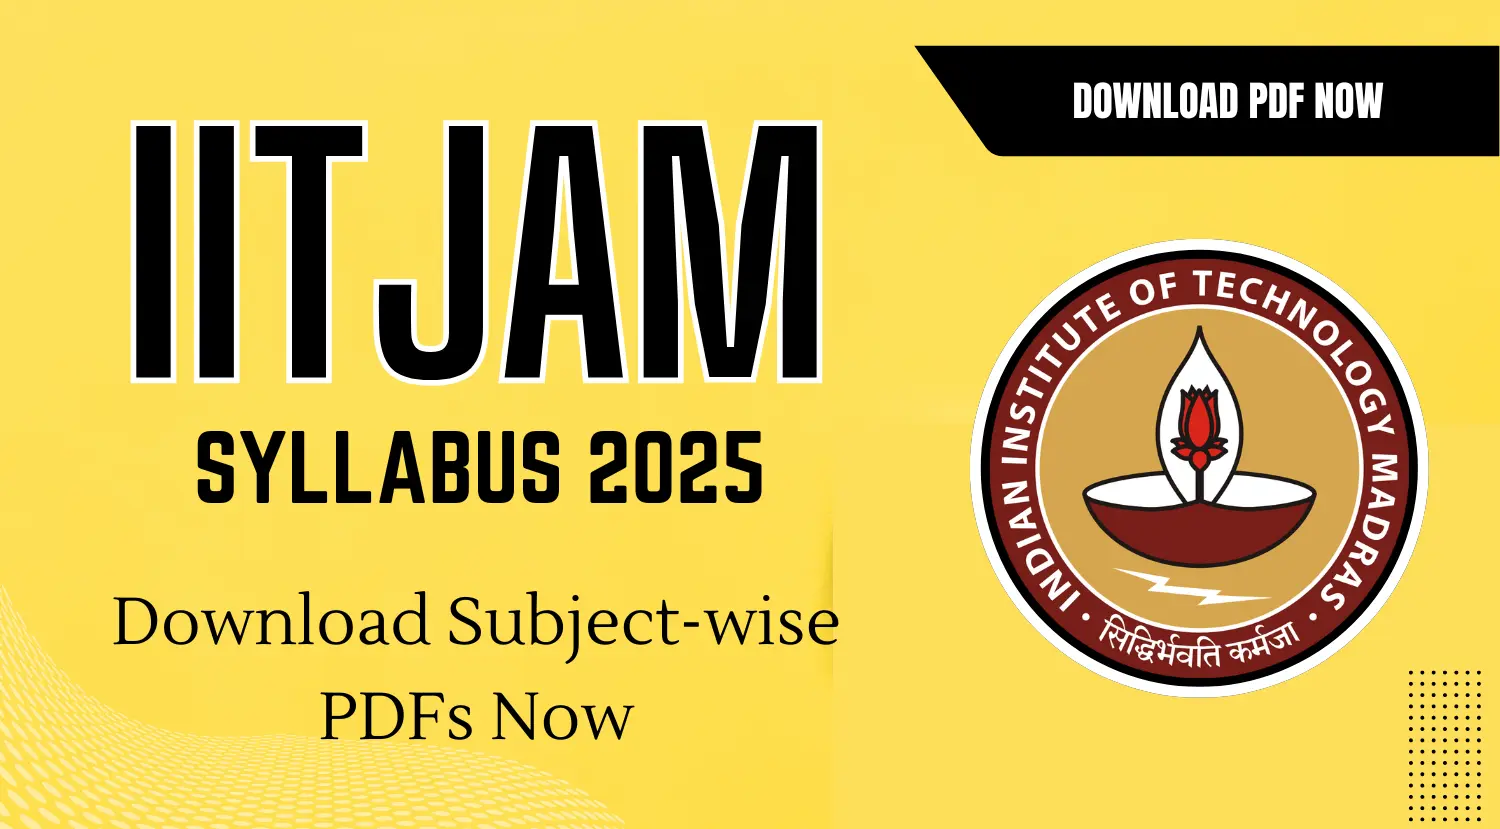 IIT JAM Syllabus 2025 Download Subject-wise PDFs Now